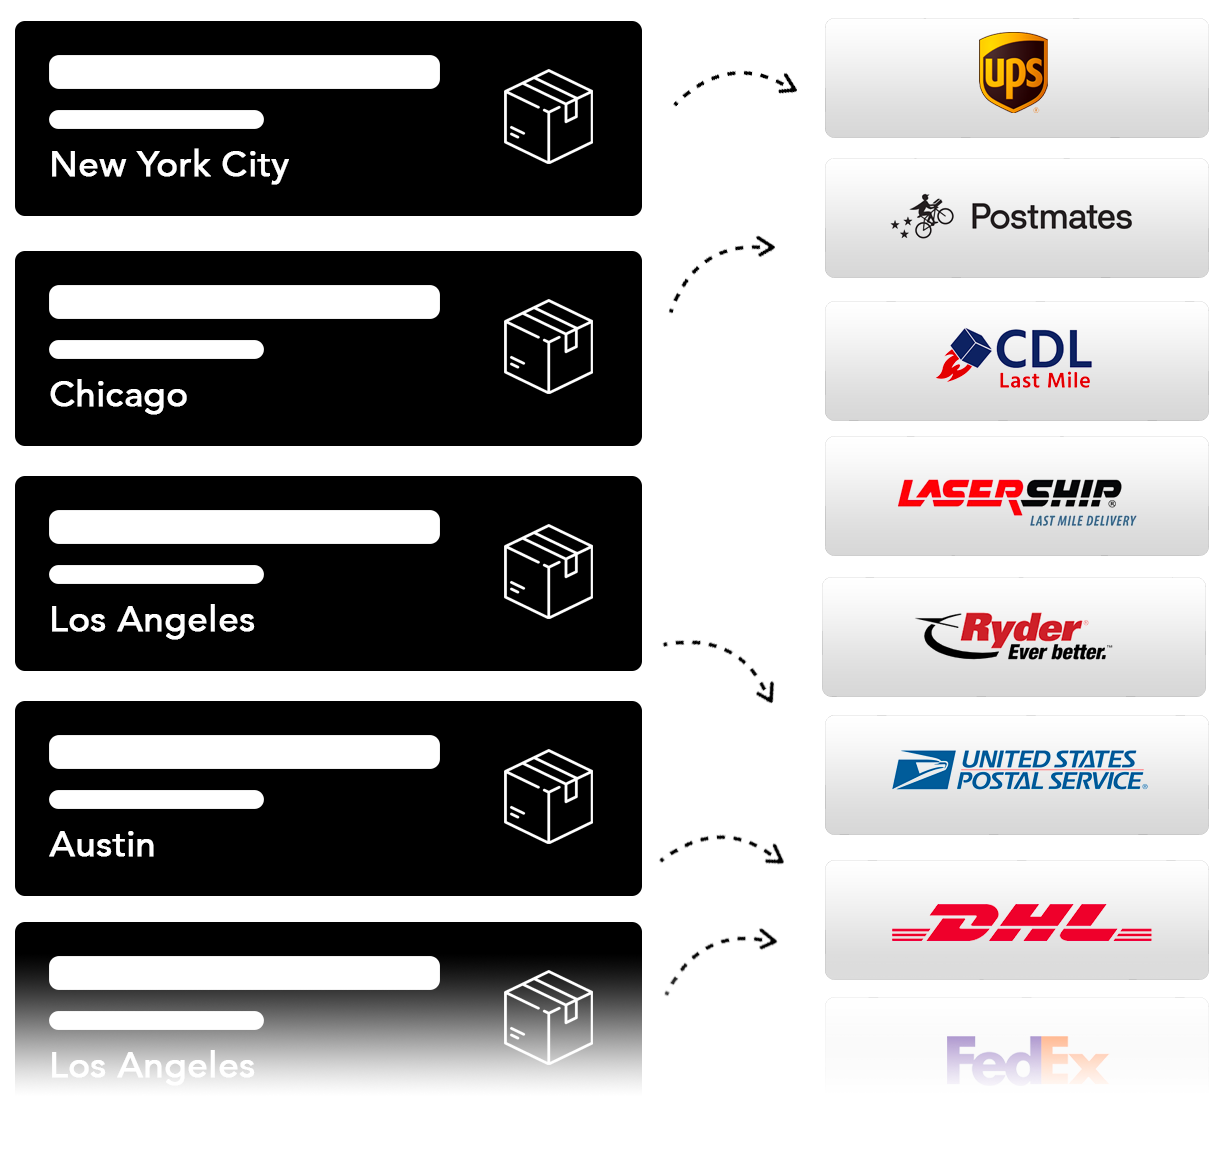 Shipping delays? Expand your delivery options beyond UPS, FedEx, and USPS